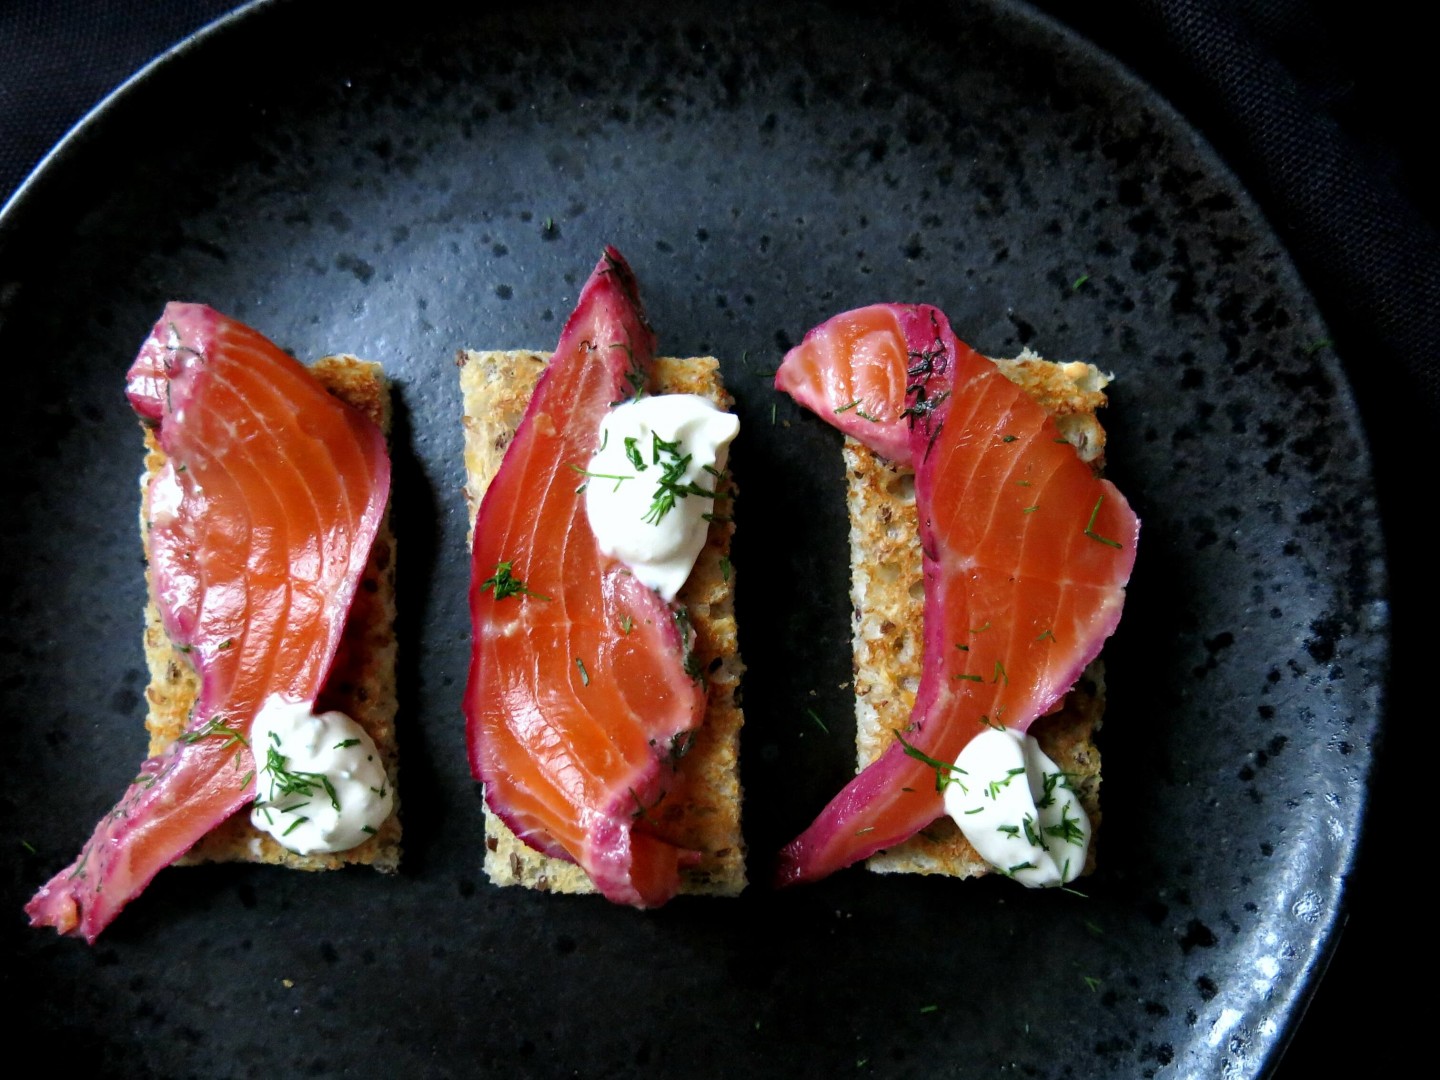 A simple and easy to follow recipe for Gin and blackberry cured salmon with horseradish crème fraîche.